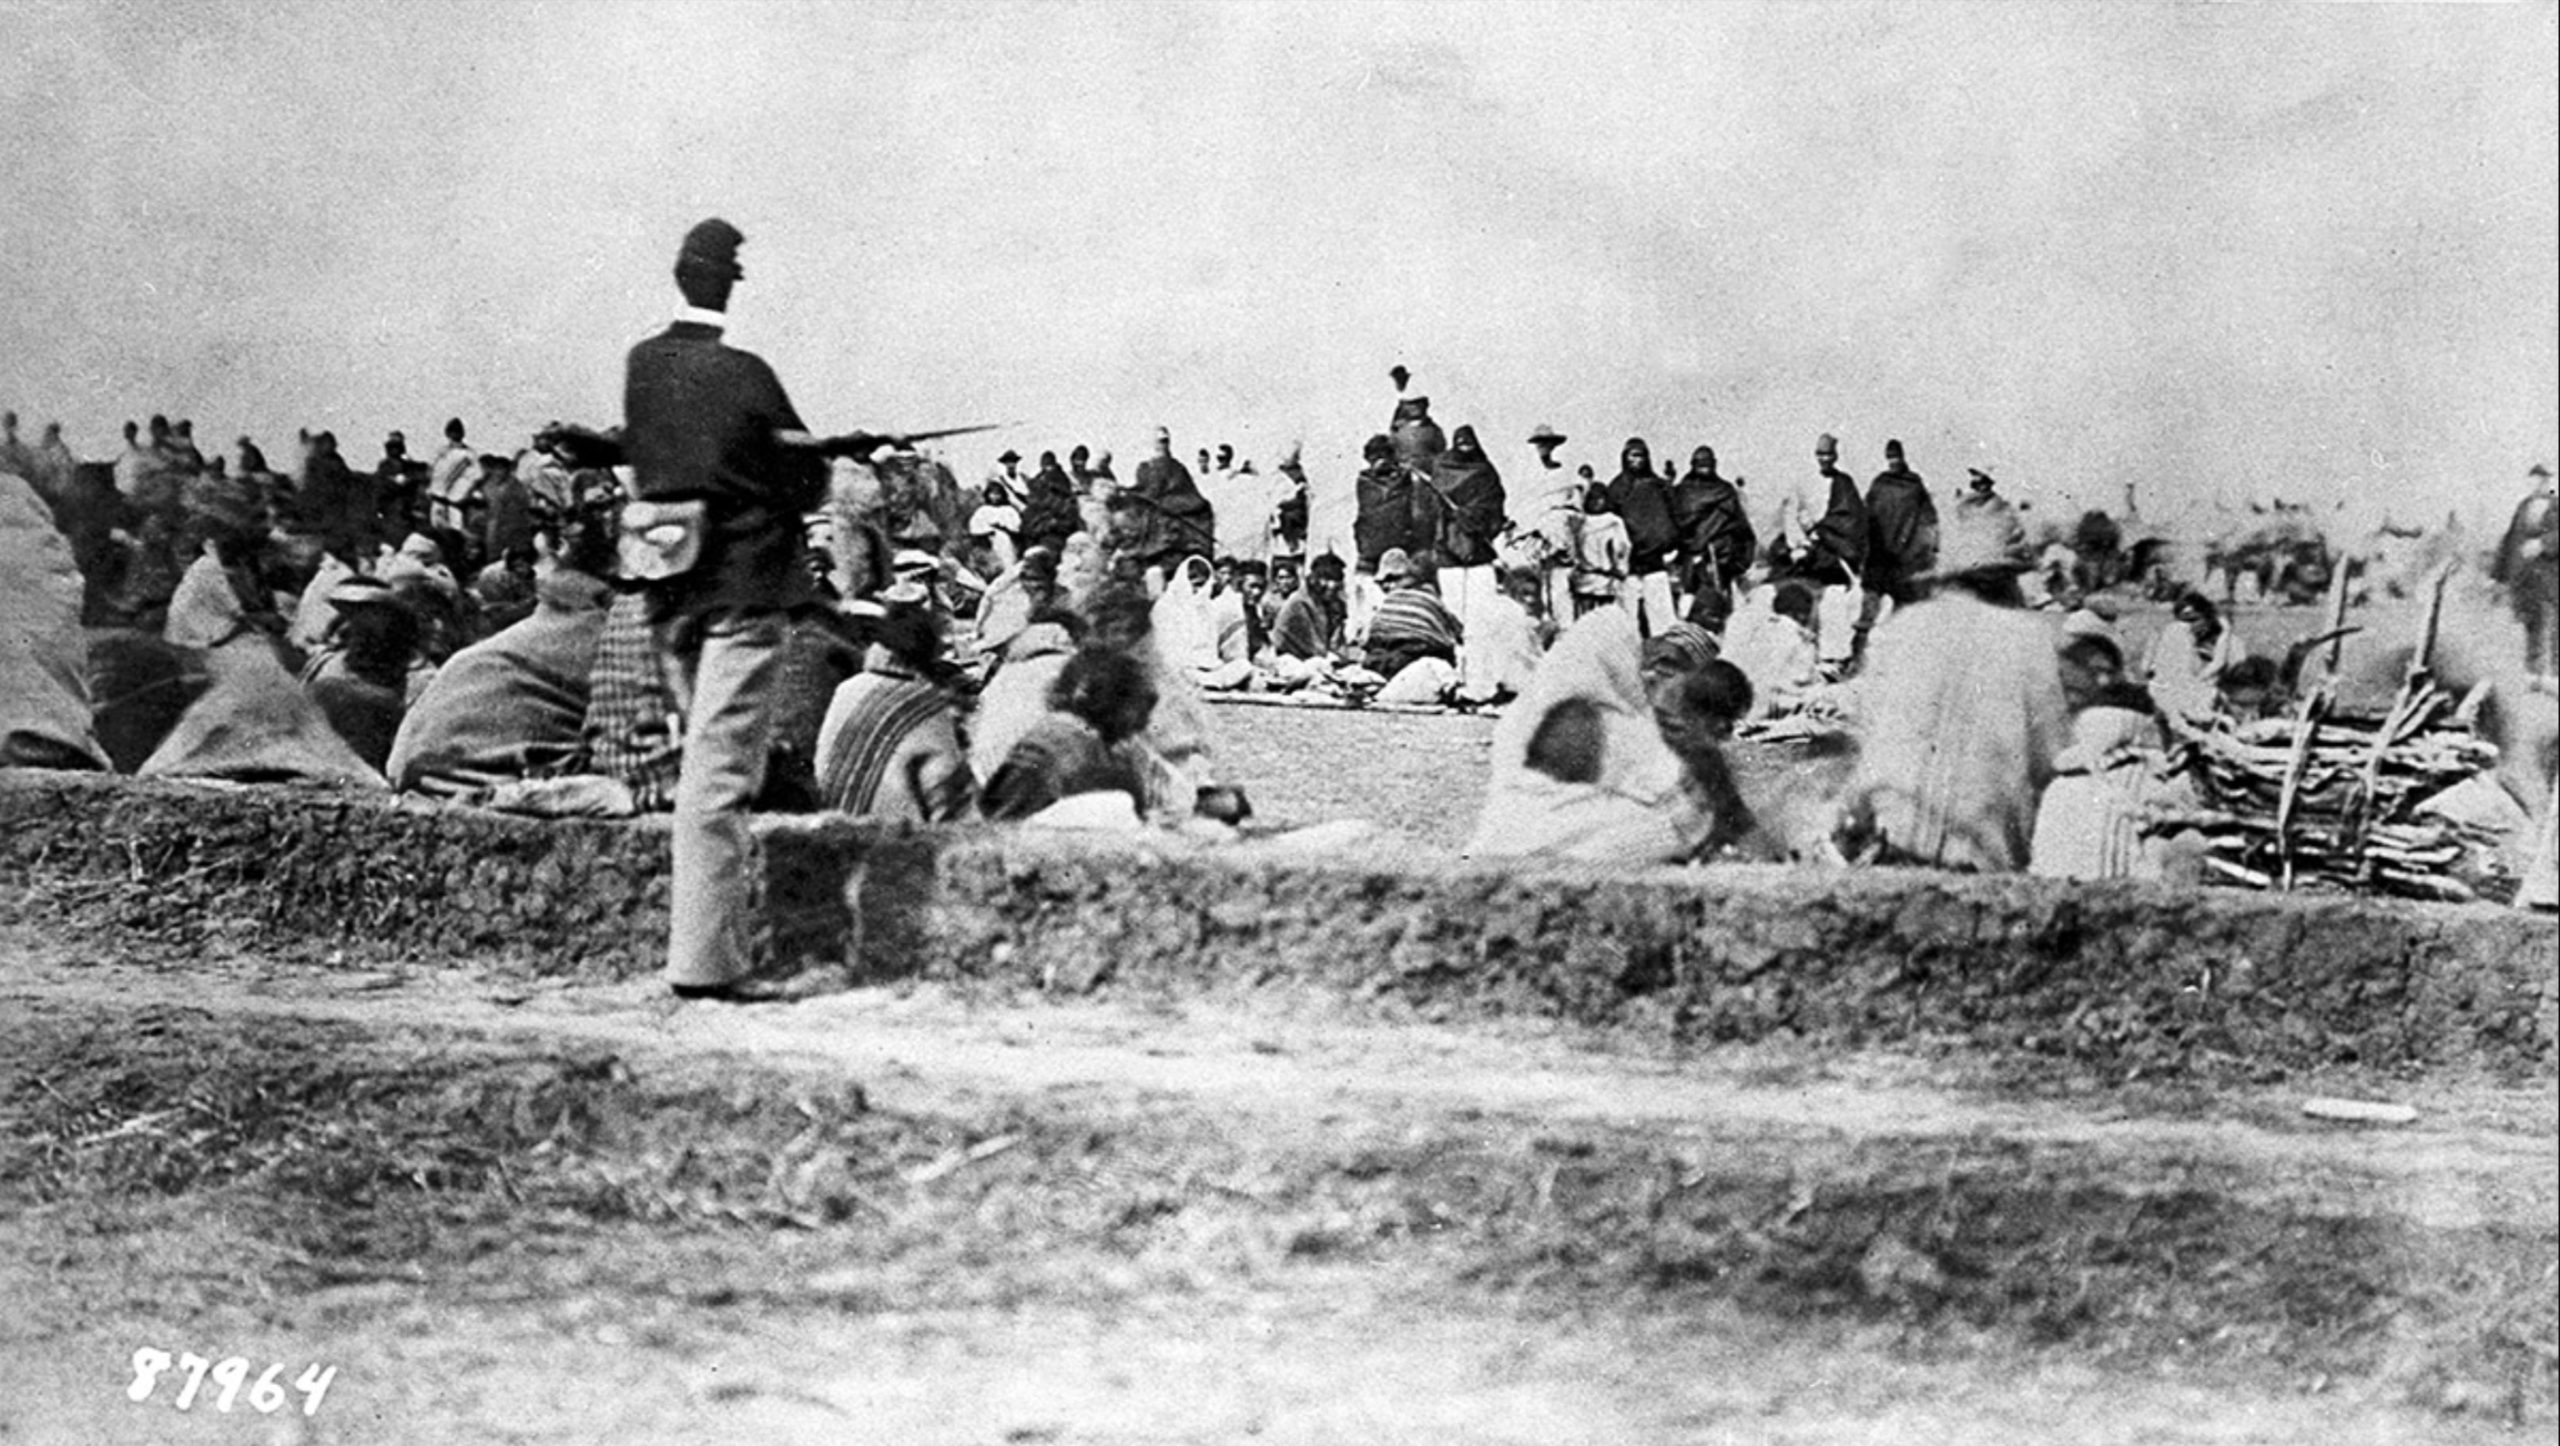 Diné (Navajo) captives under guard, Fort Sumner, New Mexico, c. 1864–68 (<a href="https://econtent.unm.edu/digital/collection/acpa/id/936/rec/1" target="_blank" rel="noopener">New Mexico History Museum</a>, photo: United States Army Signal Corps)